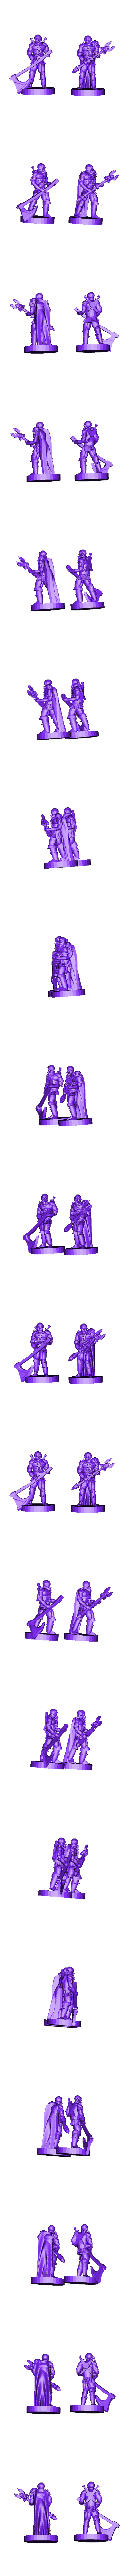 dnd_orc_28mm.stl Download free STL file DnD Orc • 3D printable object, mrhers2